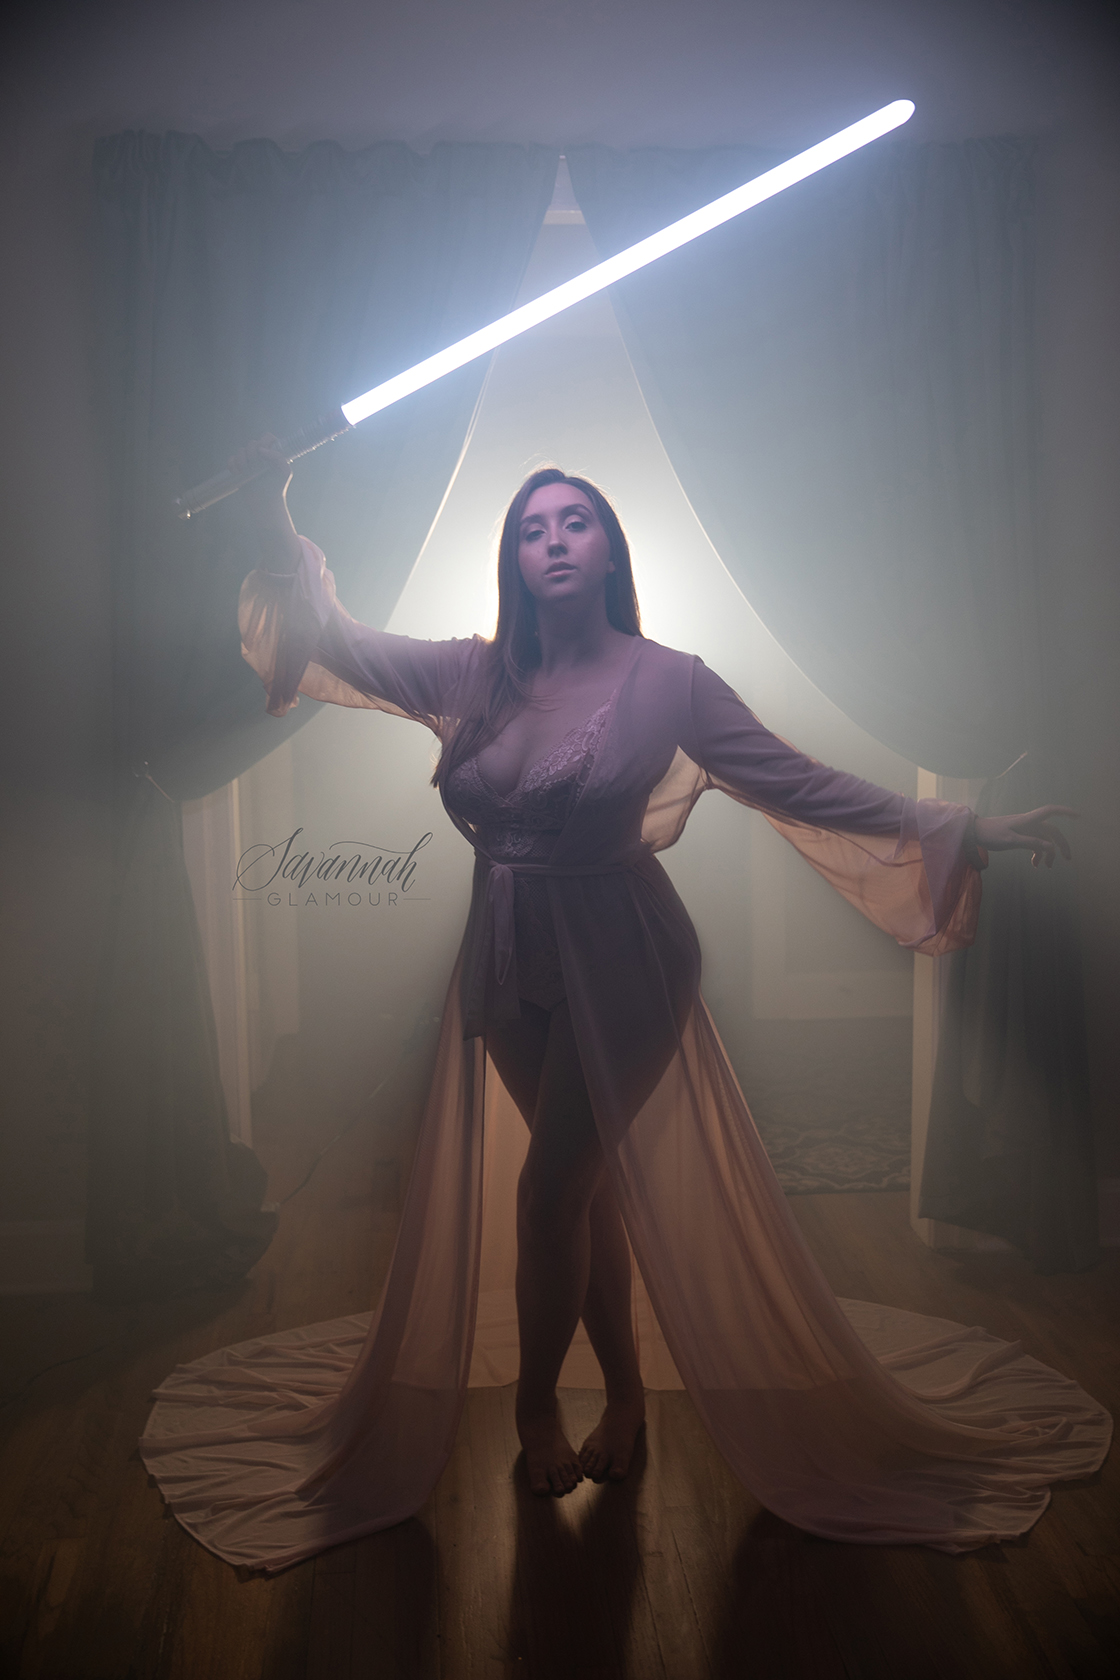 woman in sheer dress posing with lightsaber in her hand